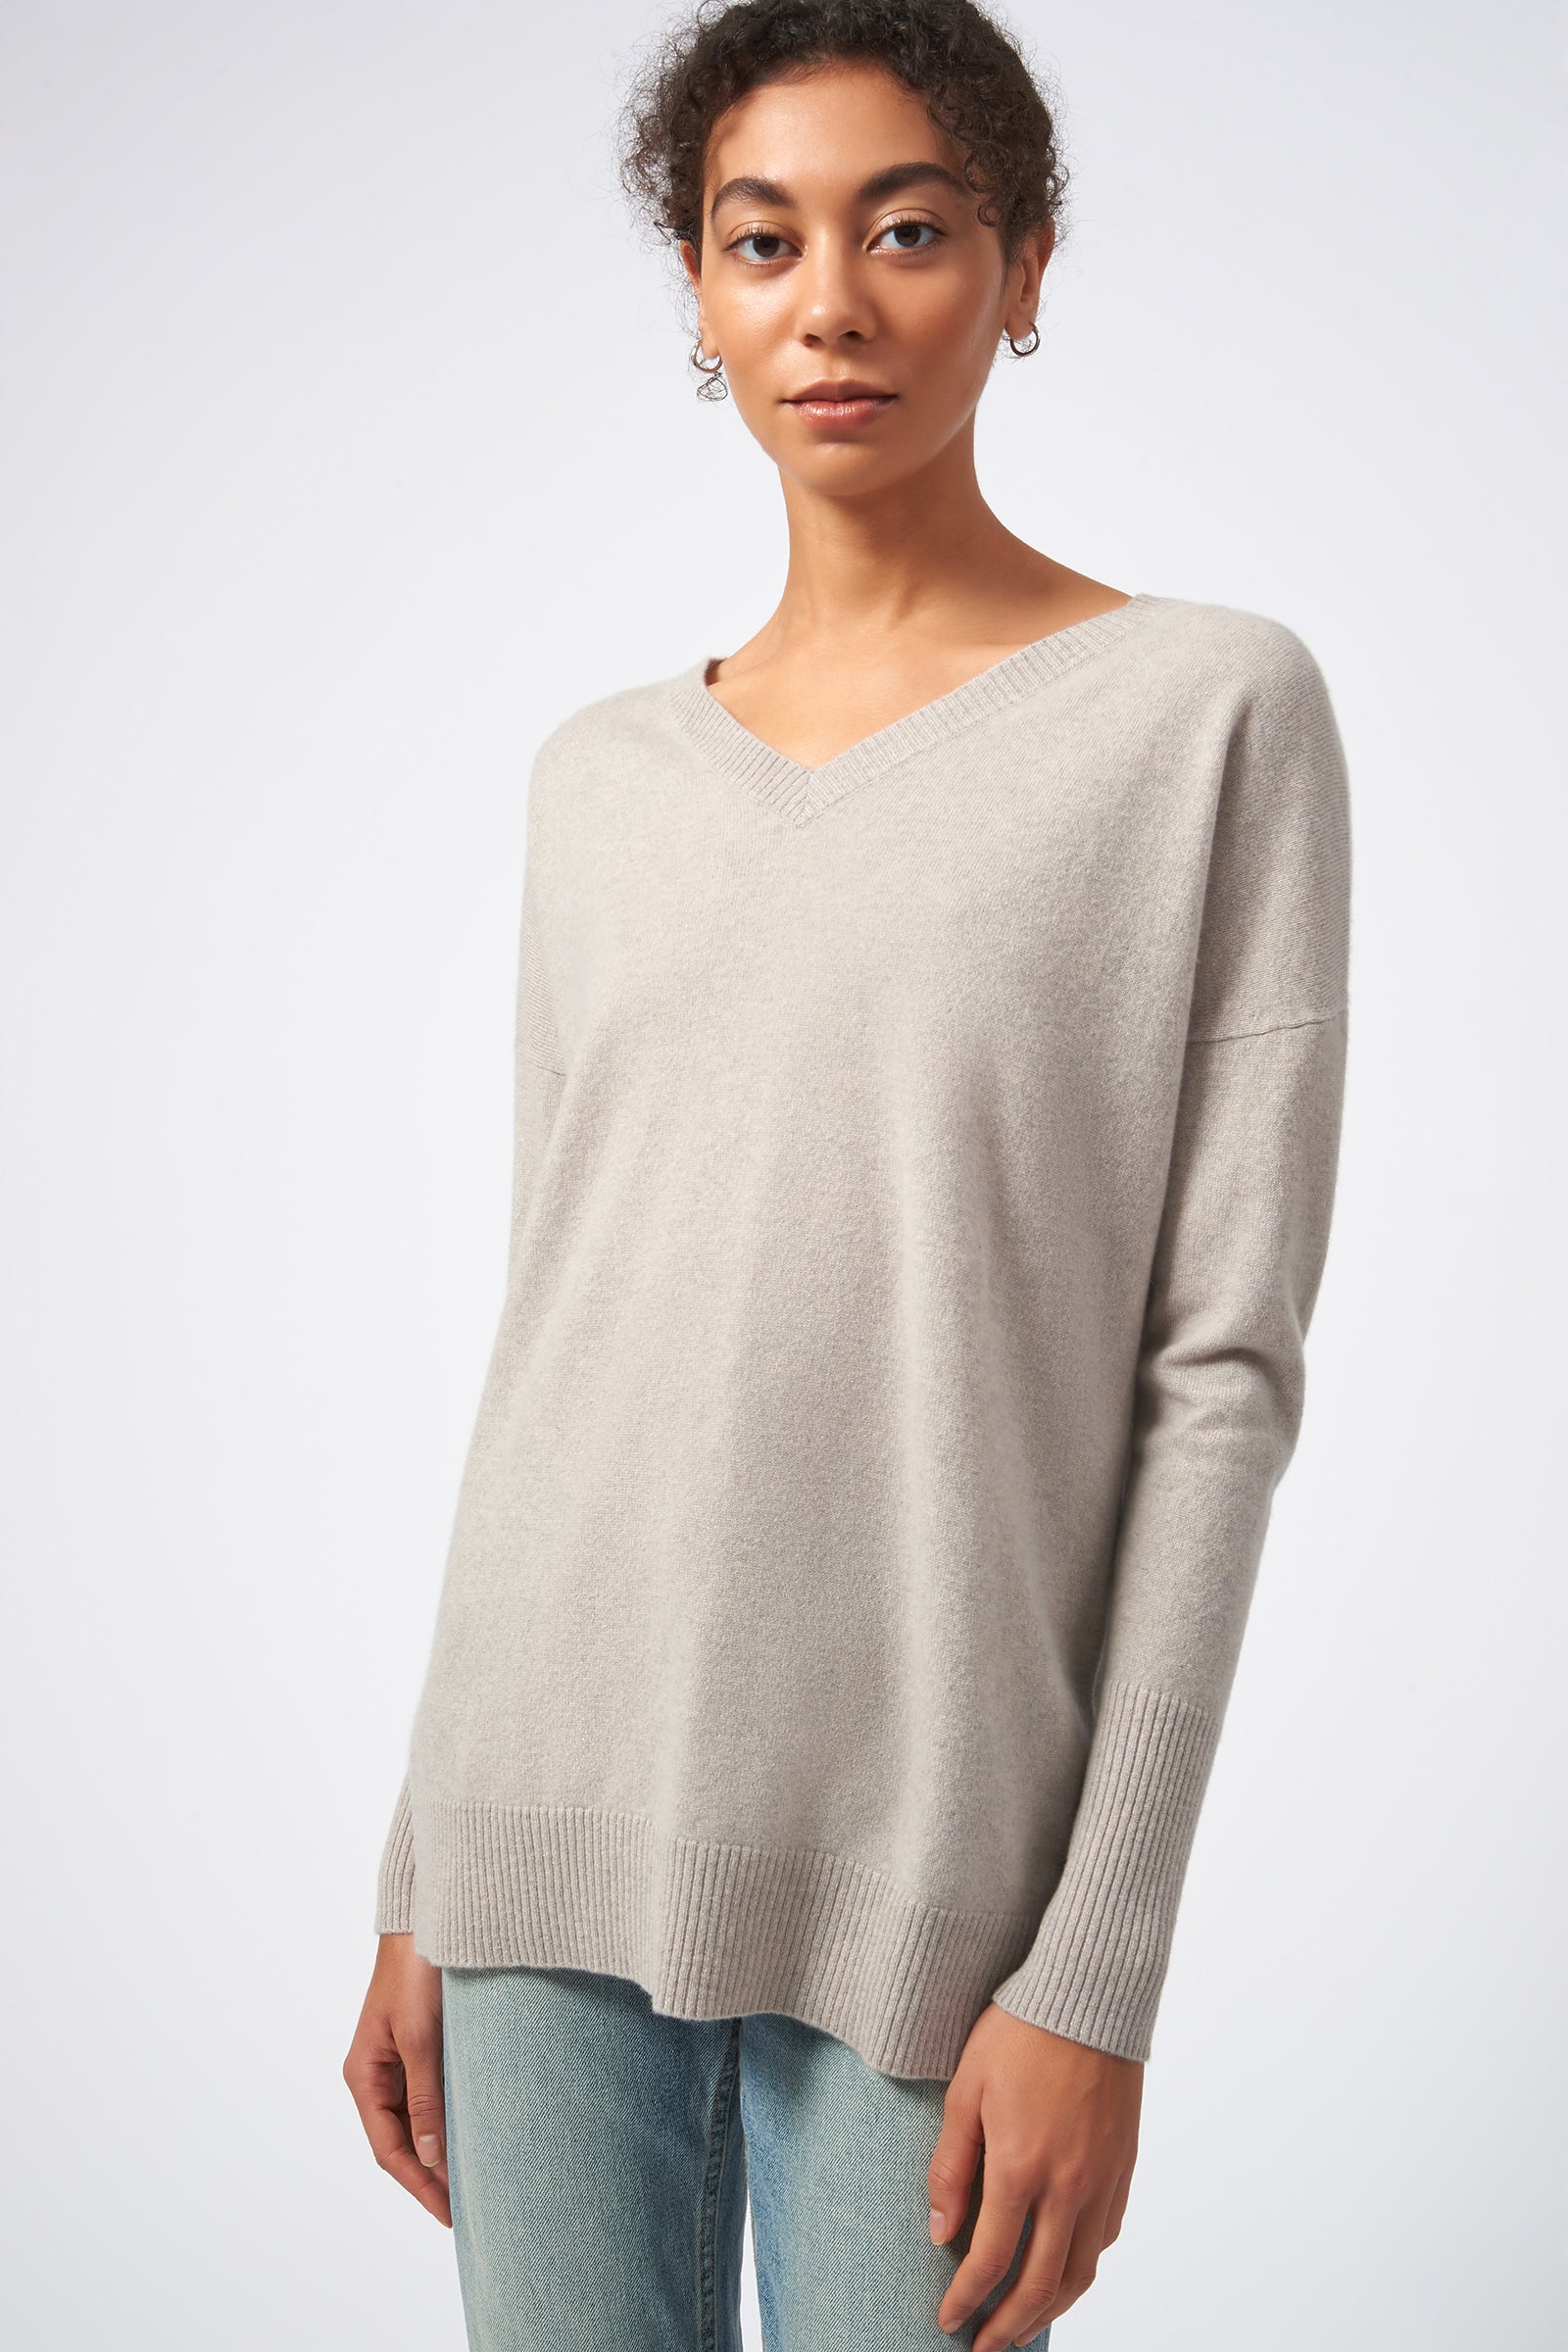 kal-rieman-cashmere-vneck-in-agate-front-view on model